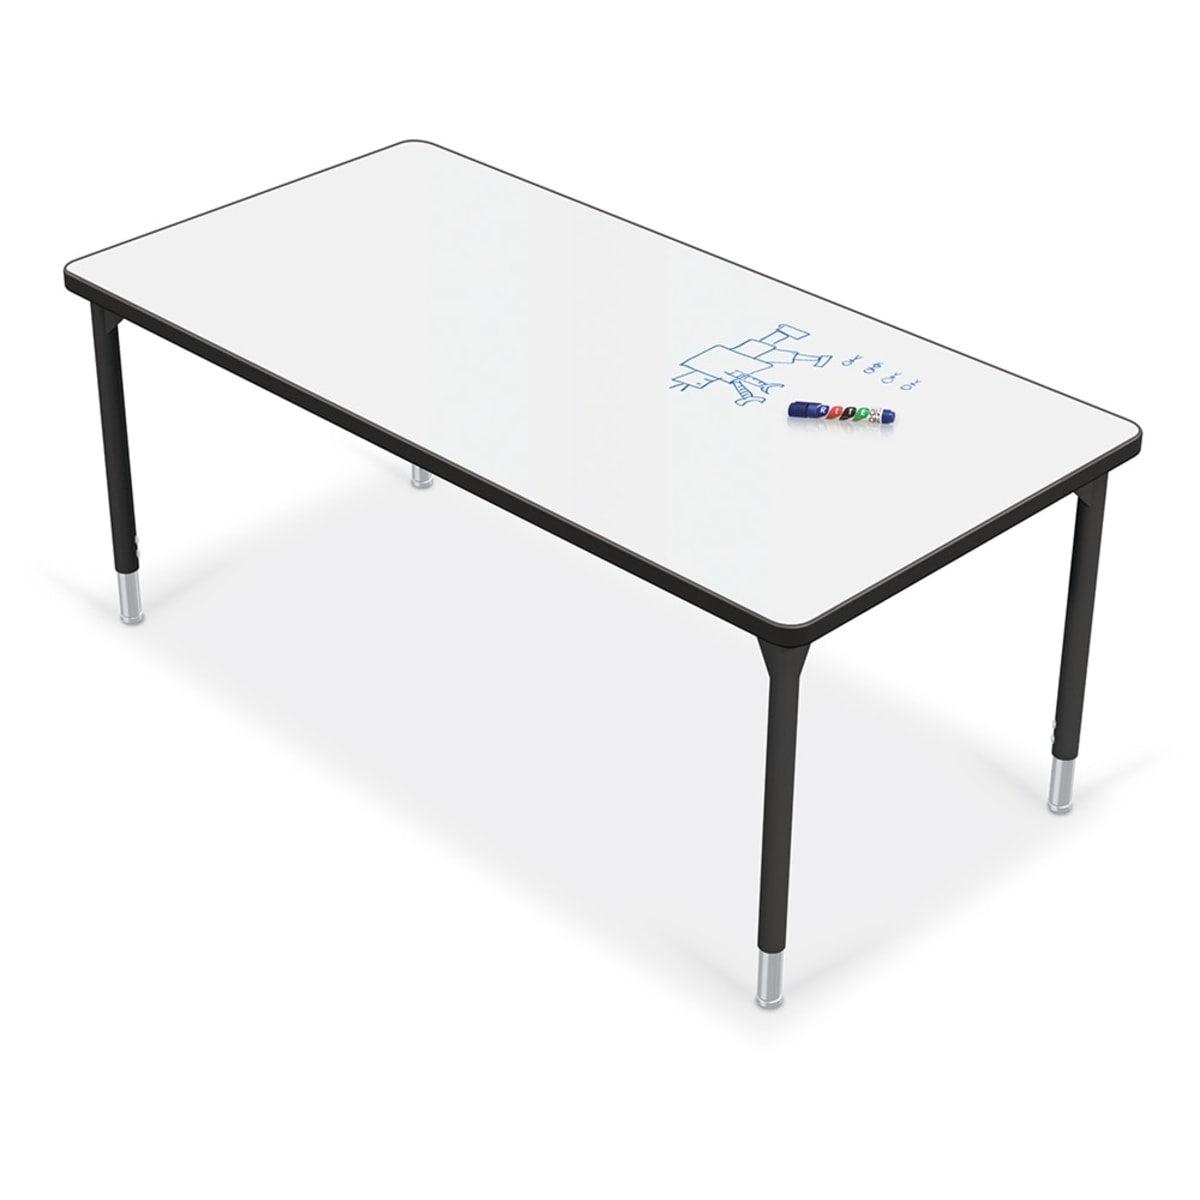 Hierarchy Activity Table + Porcelain Steel Dry Erase Whiteboard Top, 60" x 30" Rectangle, LIFETIME WARRANTY